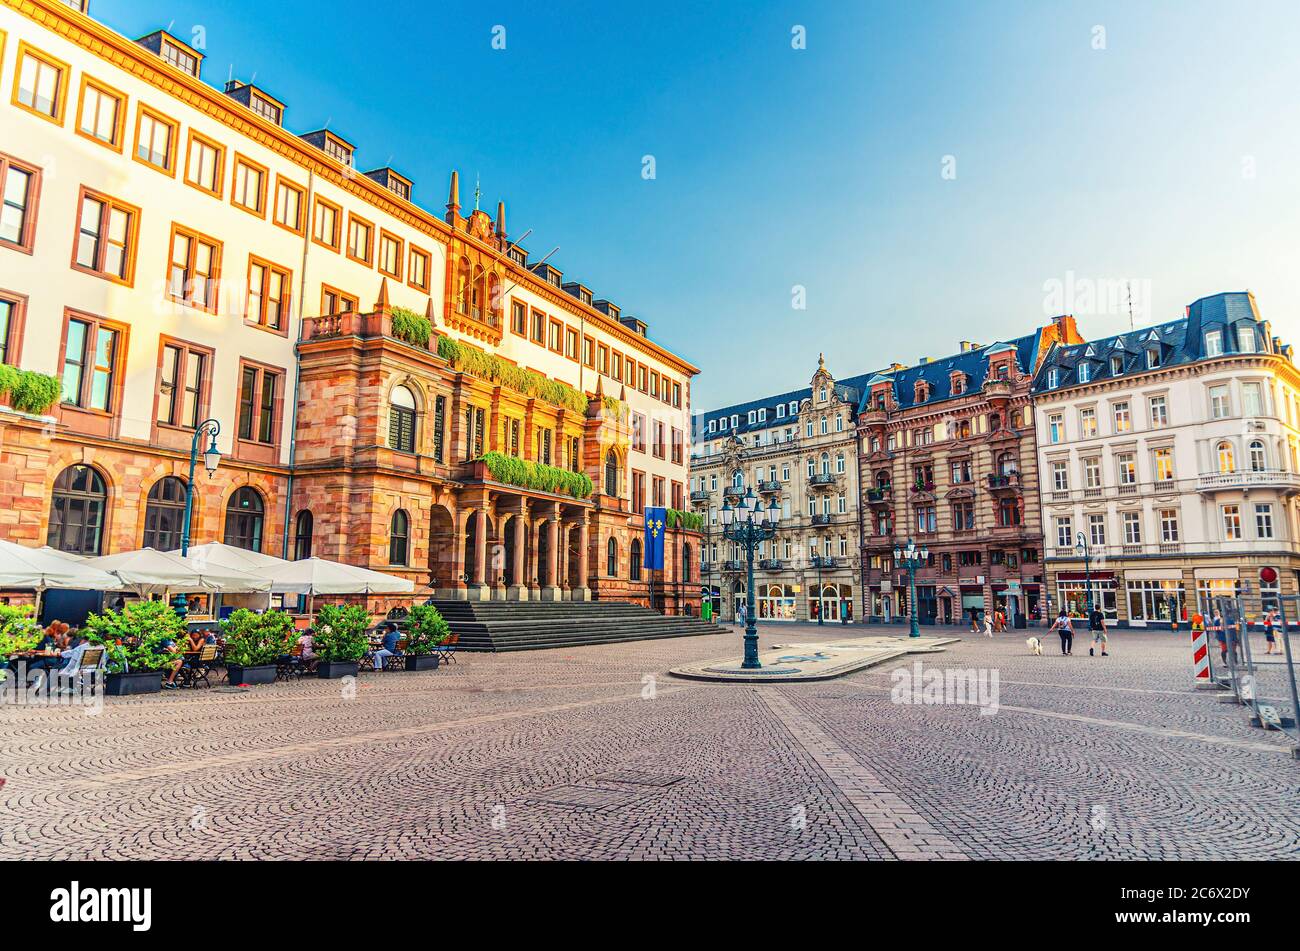 Wiesbaden City Palace Stadtschloss or New Town Hall Rathaus neo-classical building on Schlossplatz Palace Square in historical city centre, blue sky background, State of Hesse, Germany Stock Photo